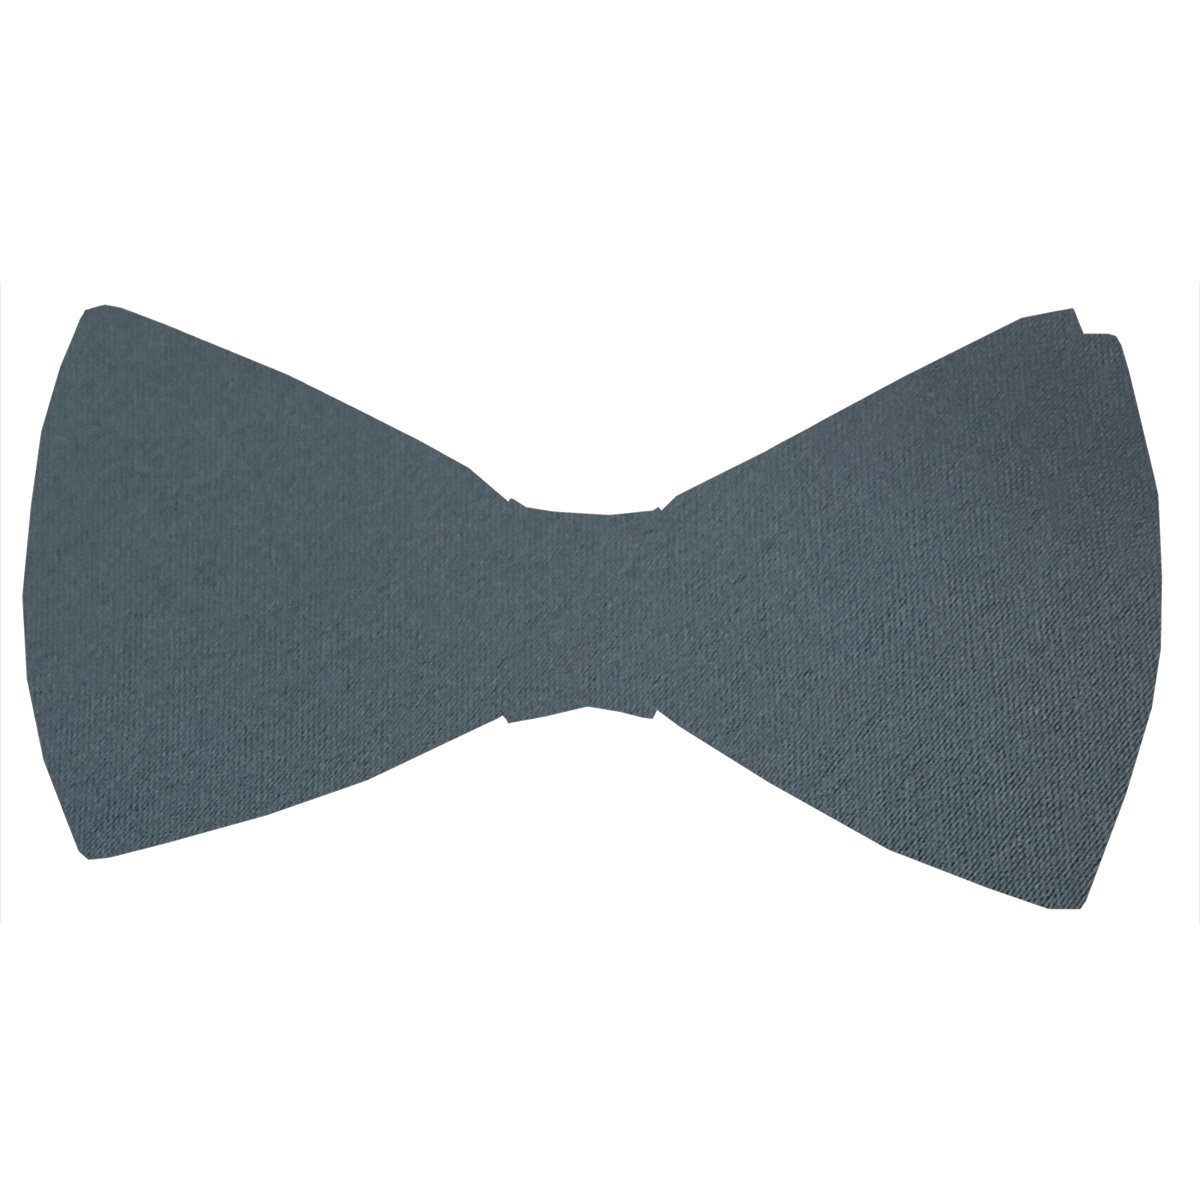 Anthracite Boys Bow Ties - Childrenswear